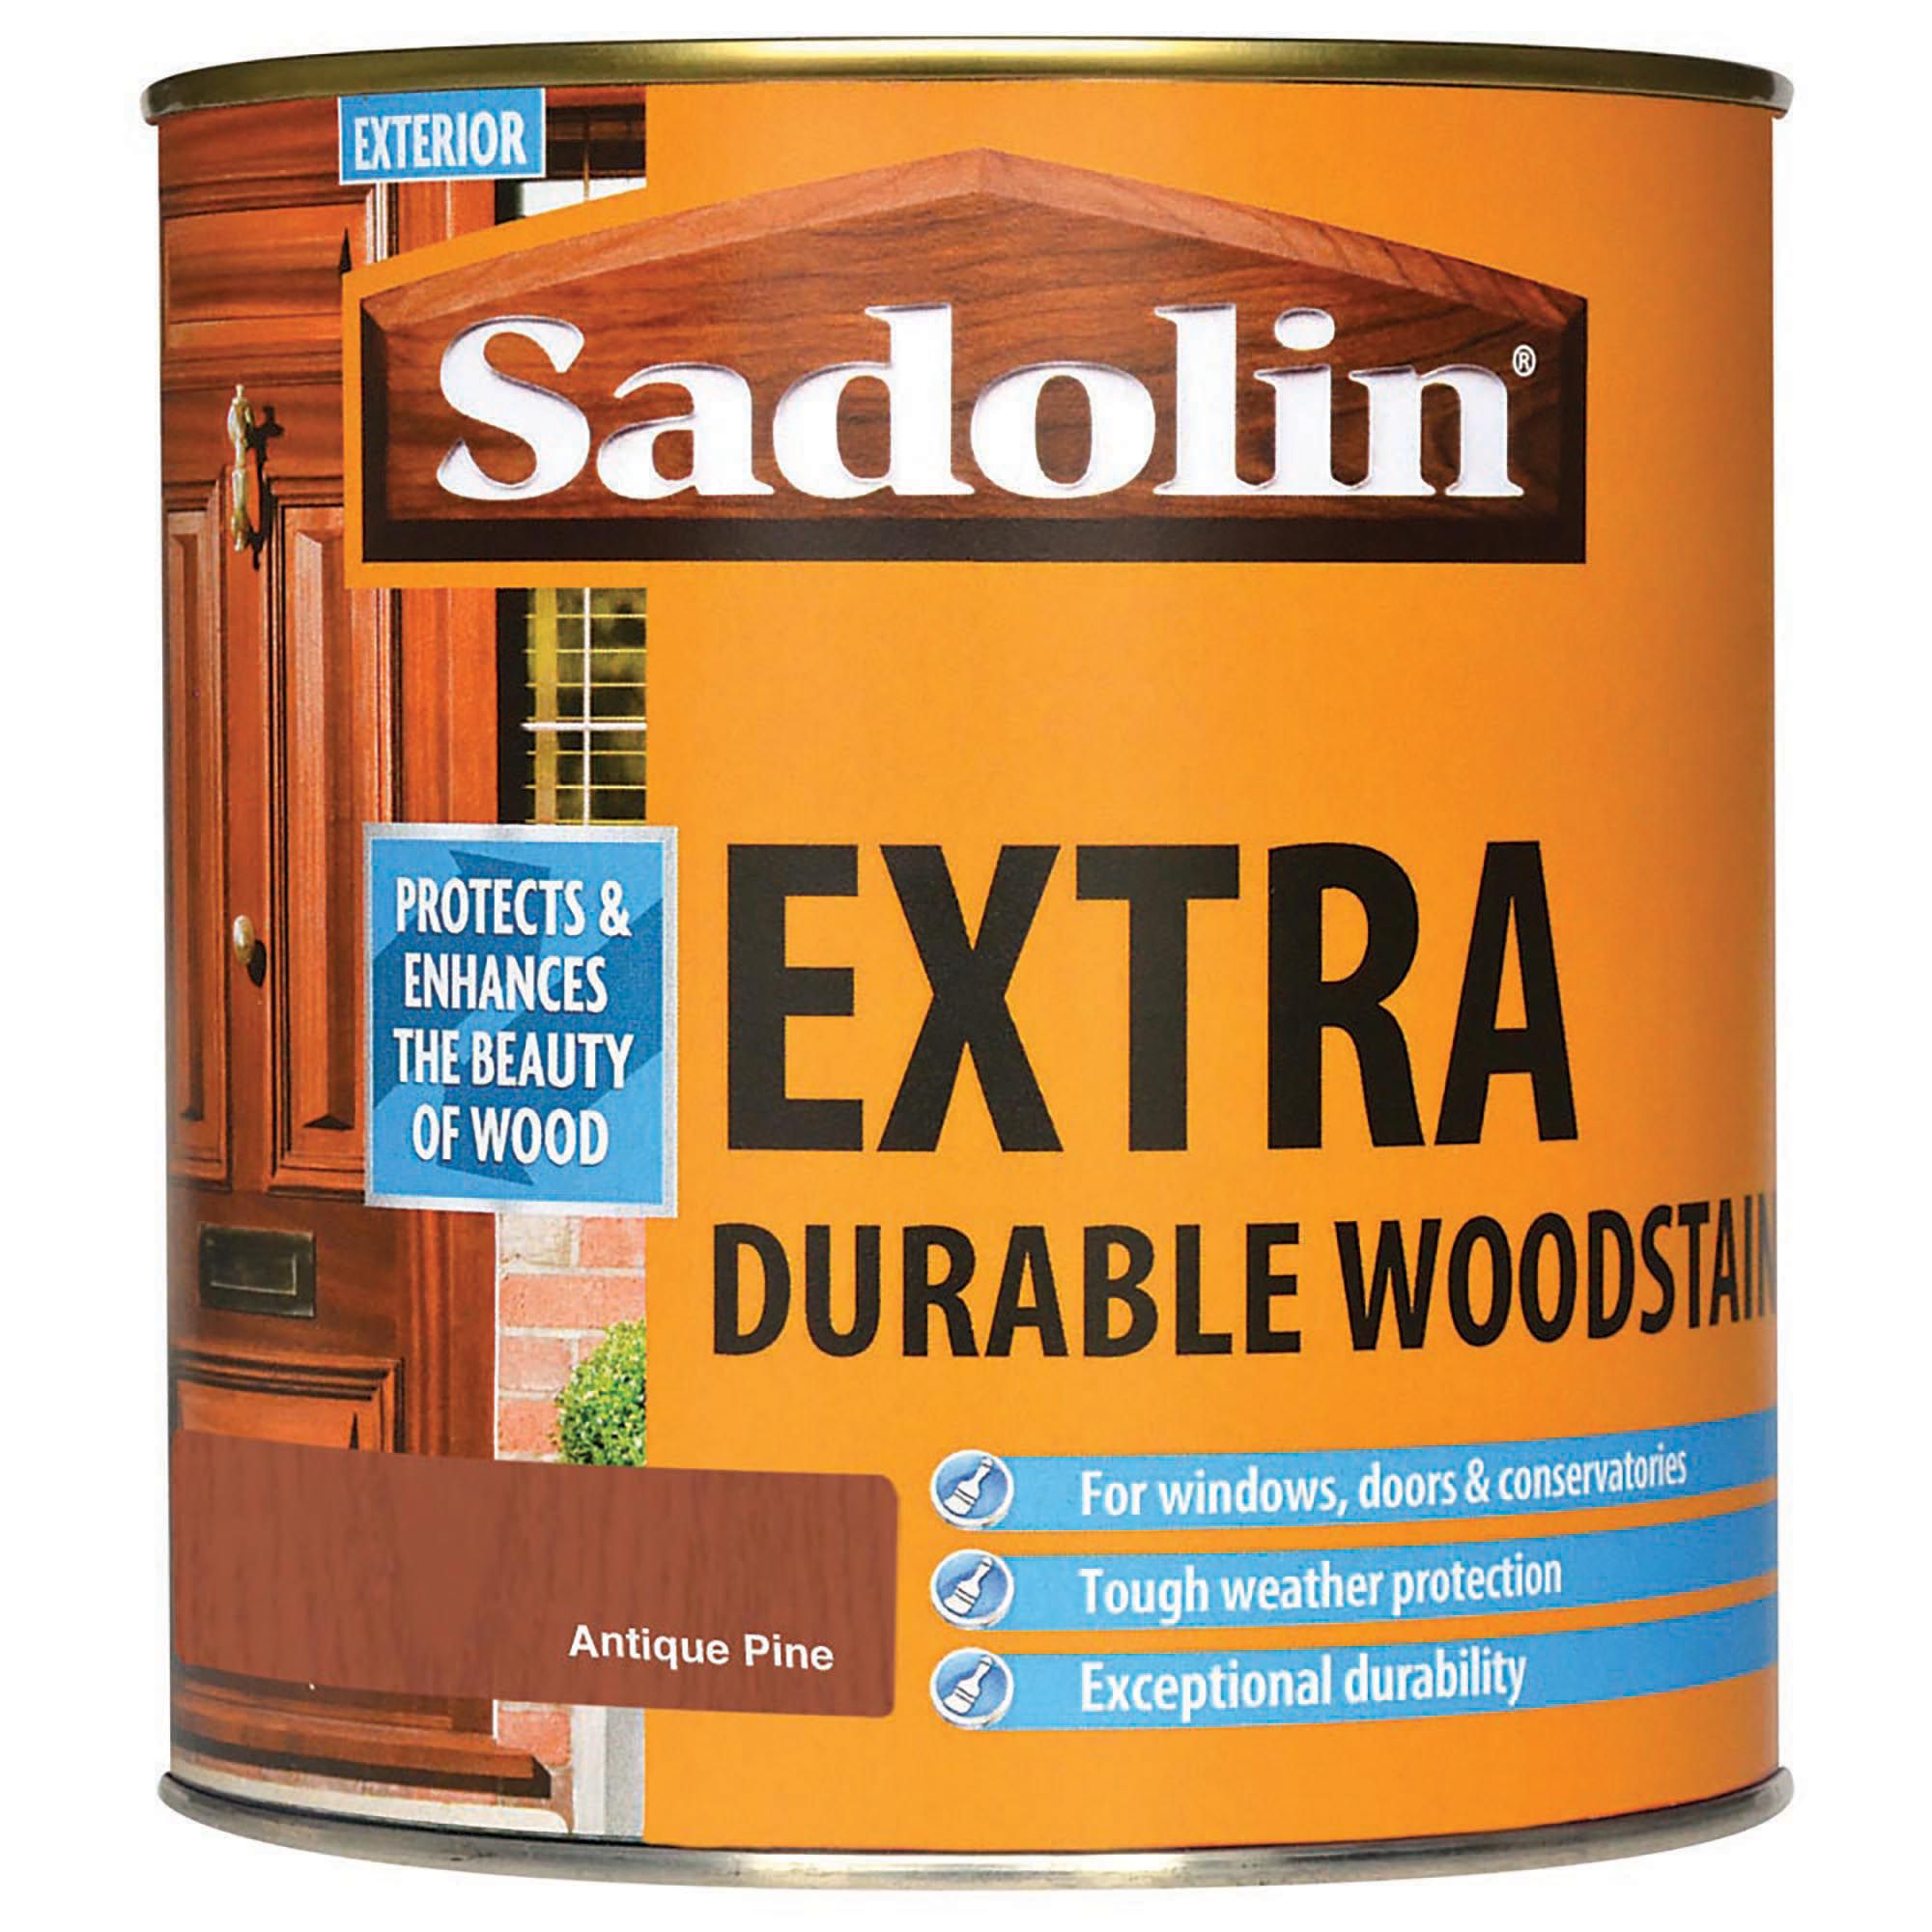 Sadolin Extra Durable Woodstain - Antique Pine - 1L